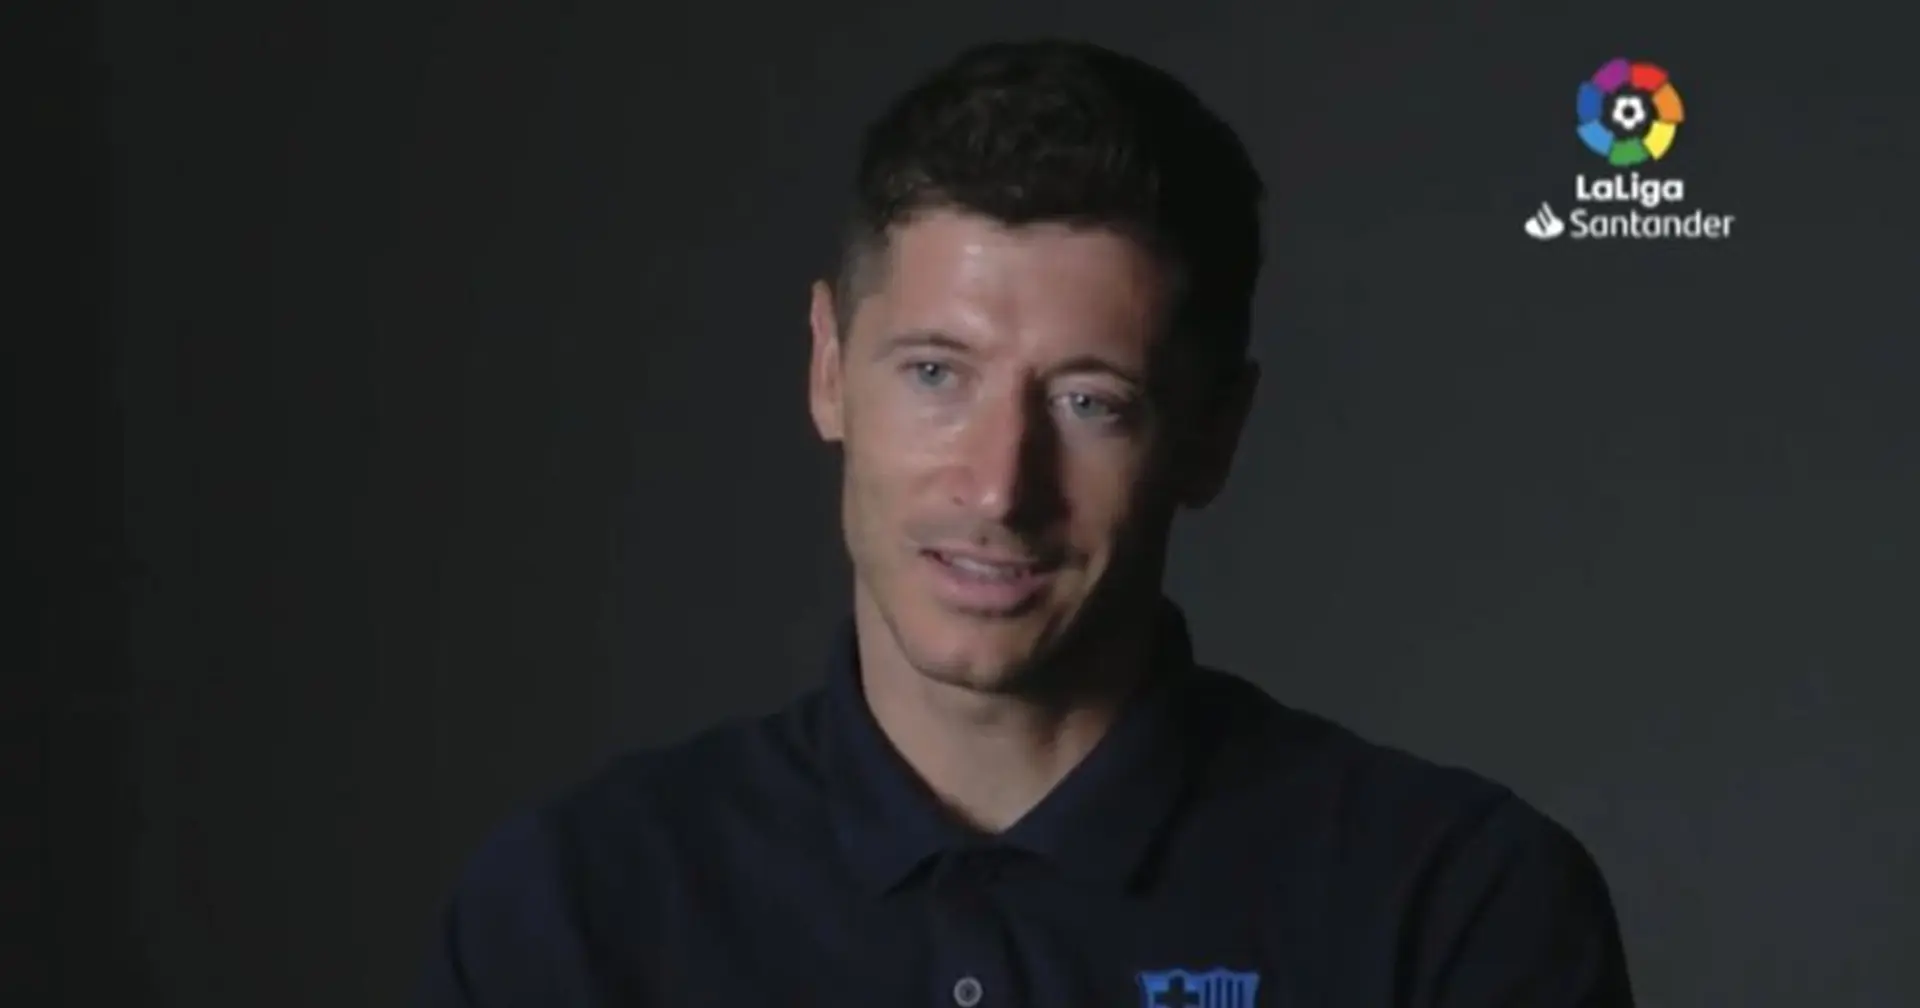 Lewandowski: 'Barca has been without success for too long, but we are going to win titles'